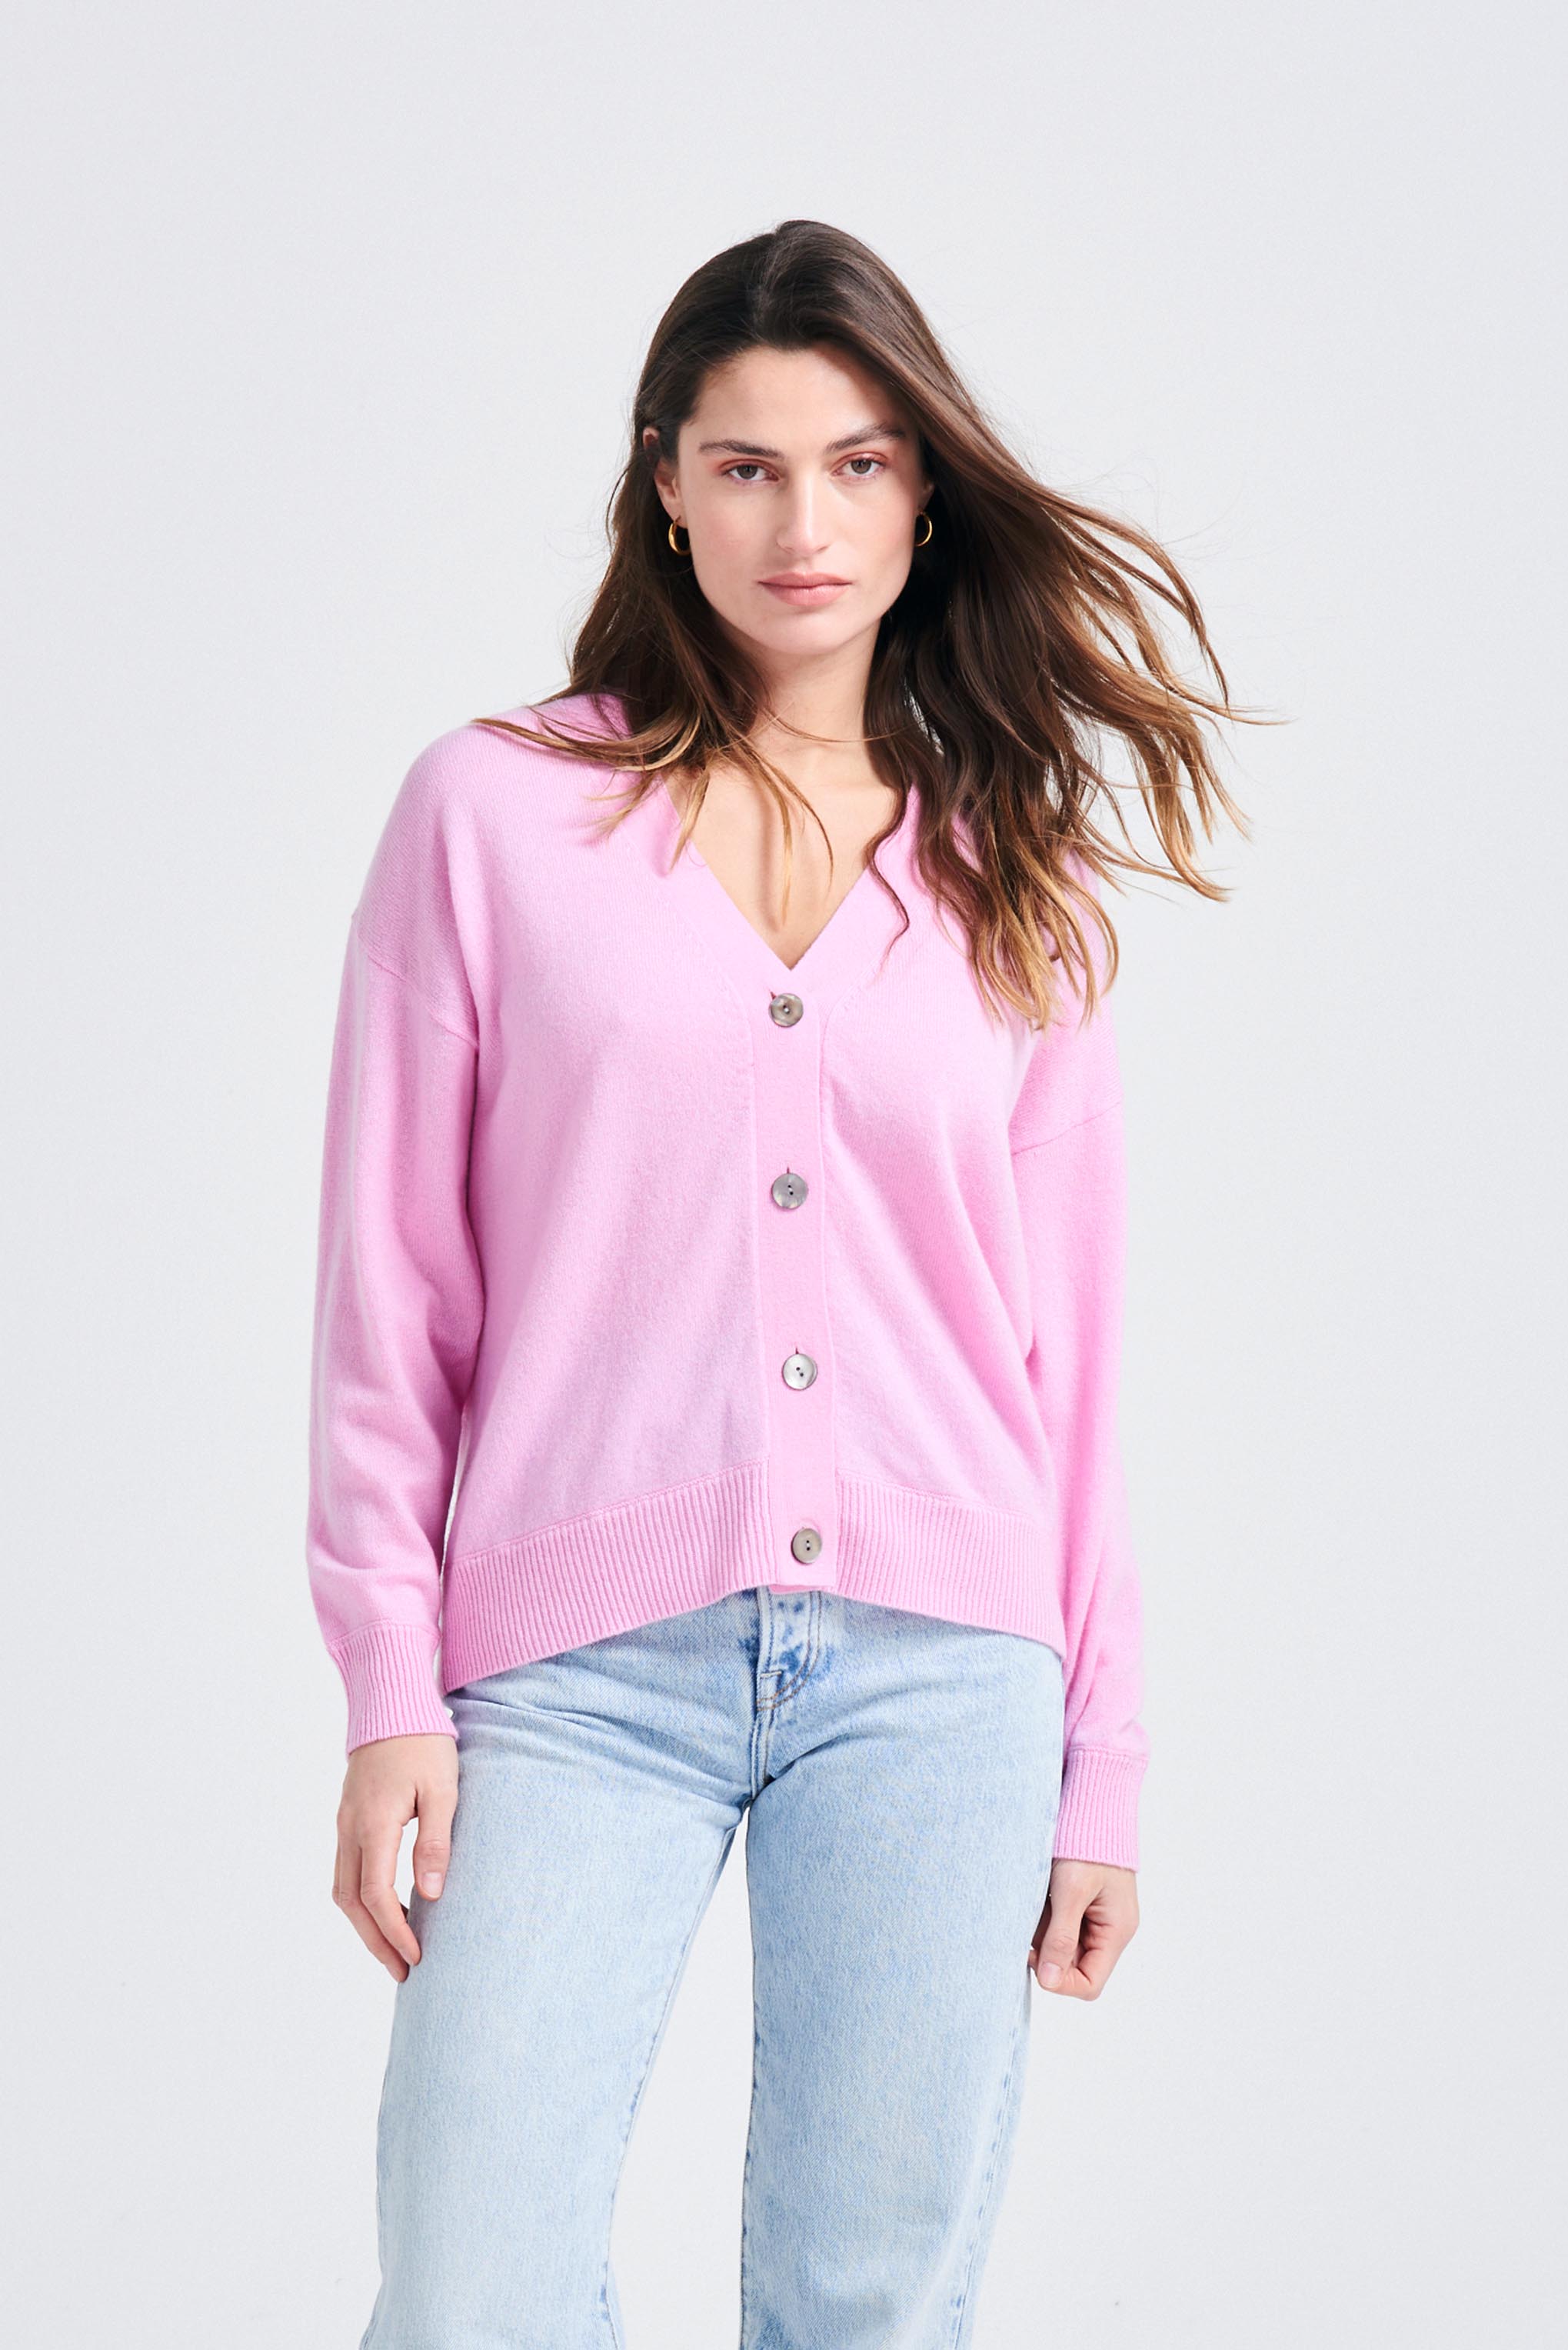 Brown haired female model wearing Jumper1234 Oversize cashmere vee neck cardigan in rose